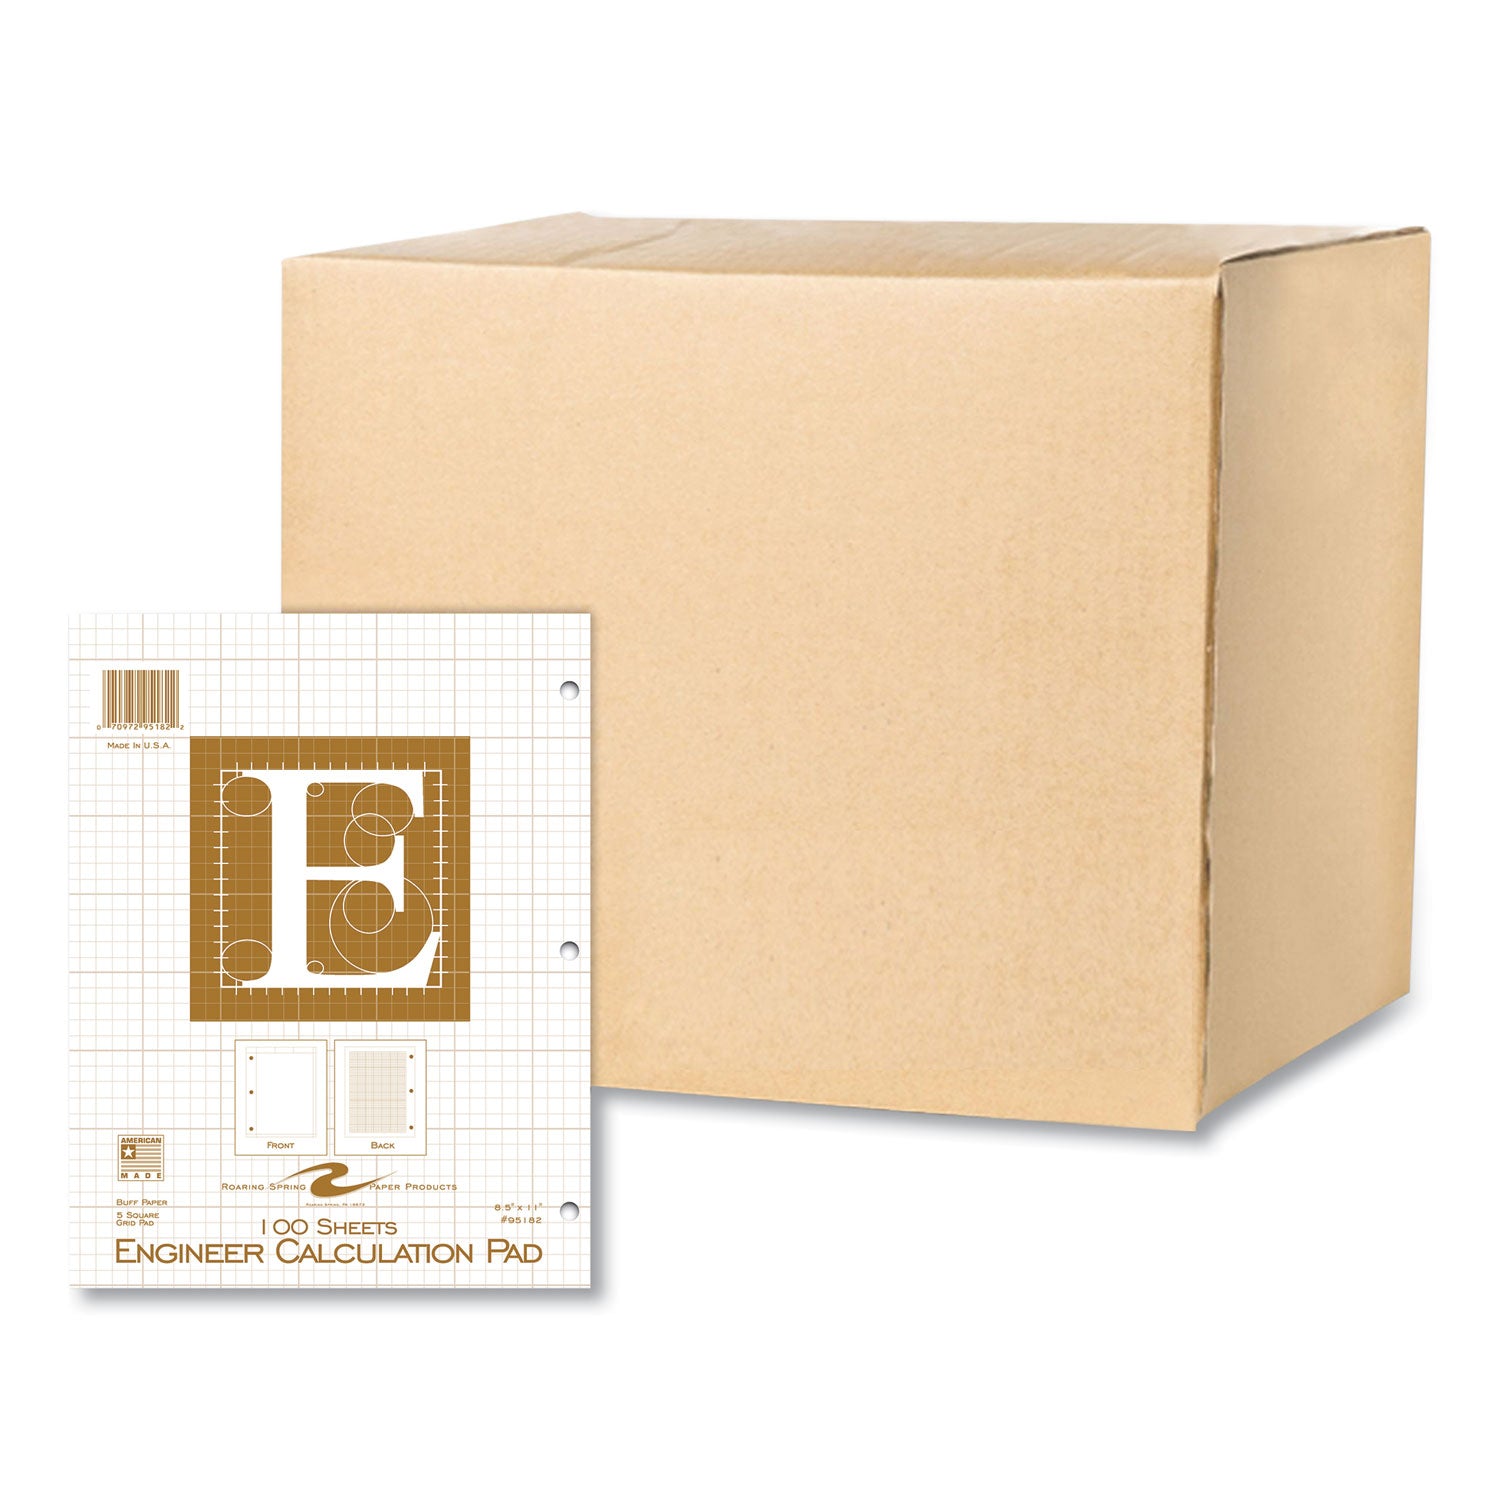 engineer-pad-quadrille-rule-5-sq-in-100-buff-85-x-11-sheets-24-carton-ships-in-4-6-business-days_roa95182cs - 1